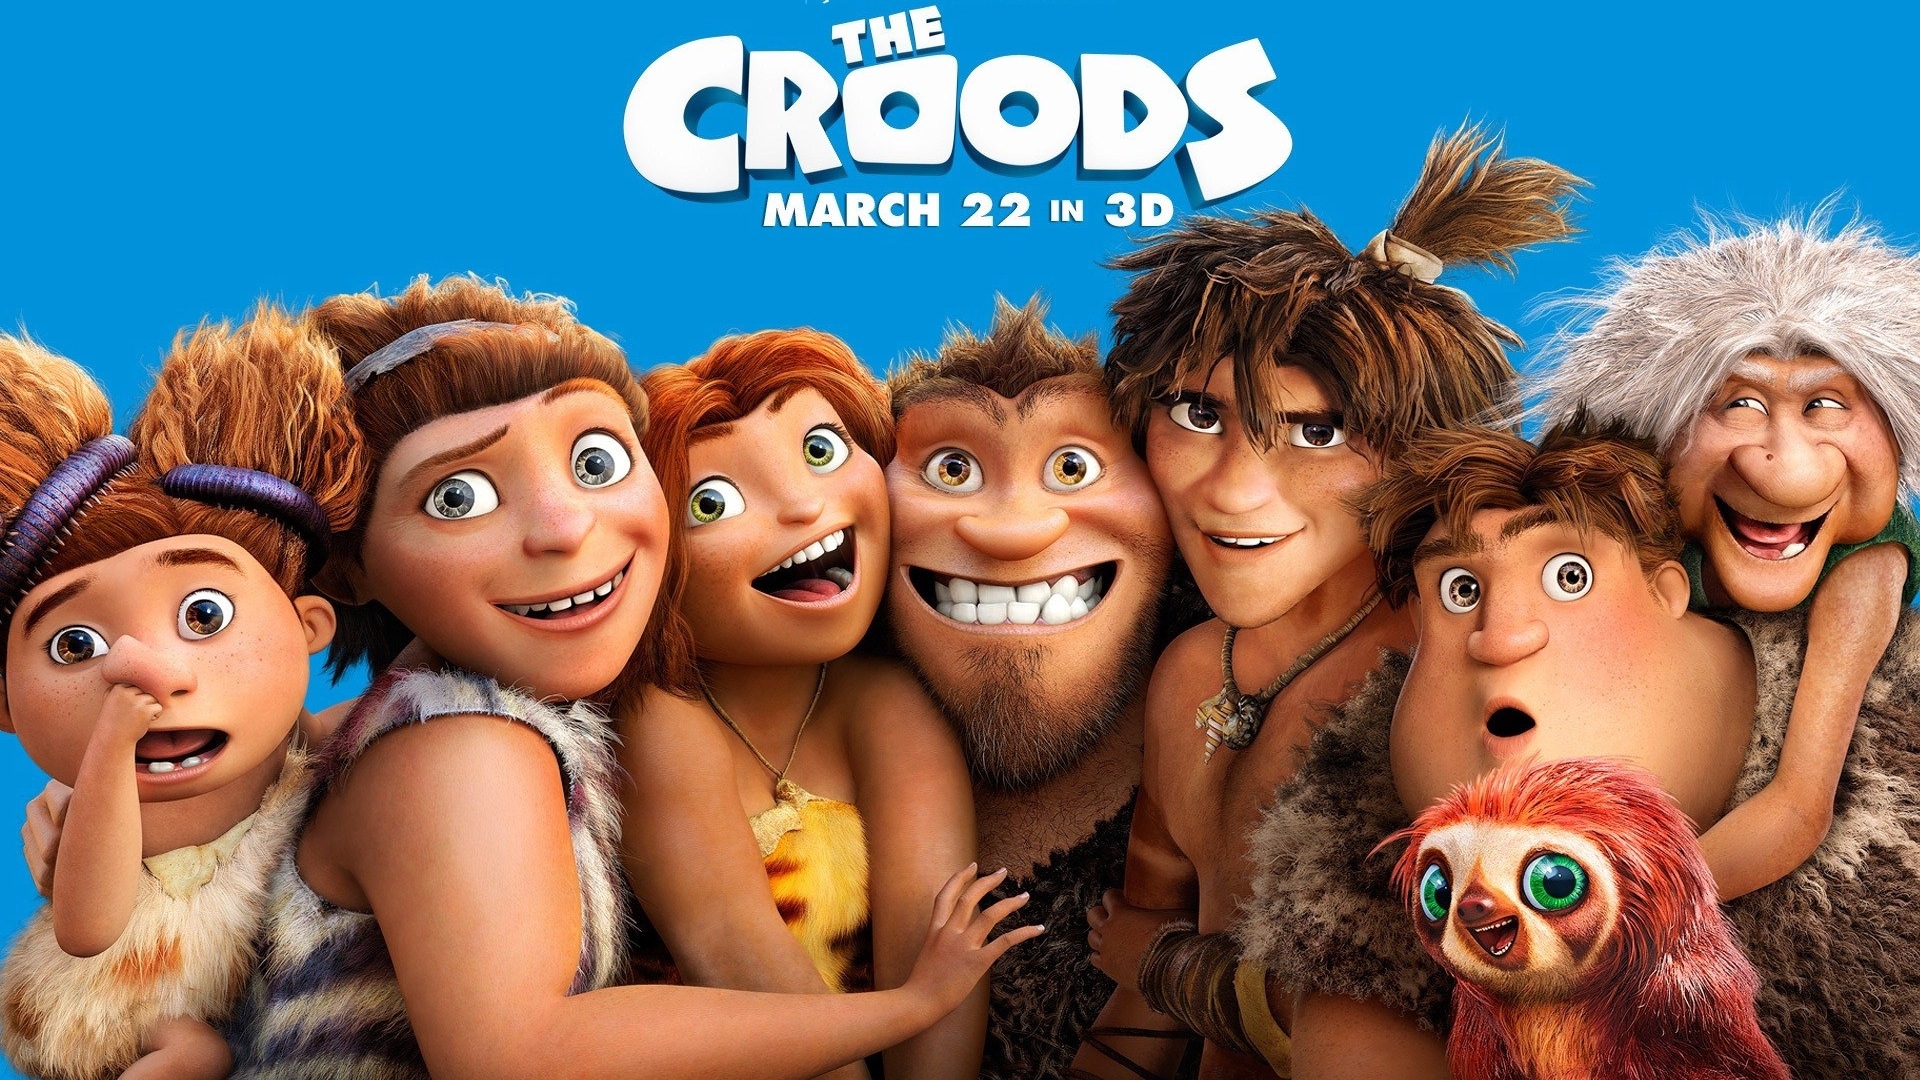 The Croods HD movie wallpapers #3 - 1920x1080